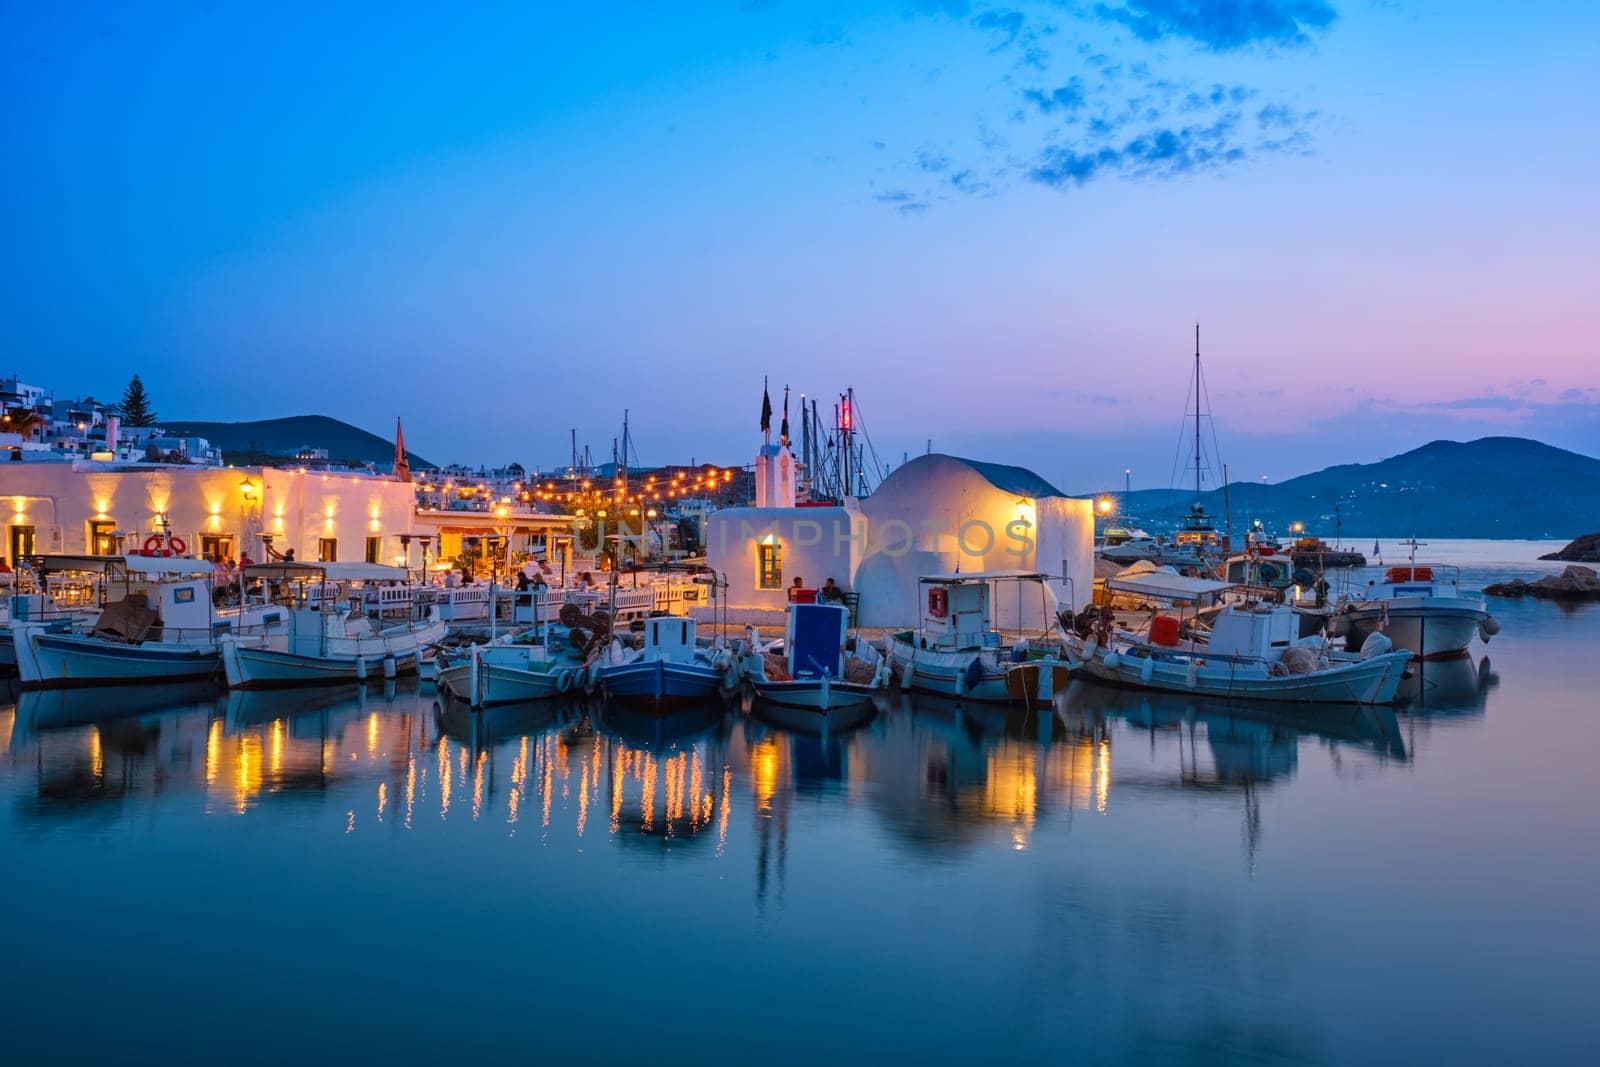 Picturesque Naousa town on Paros island, Greece in the night by dimol